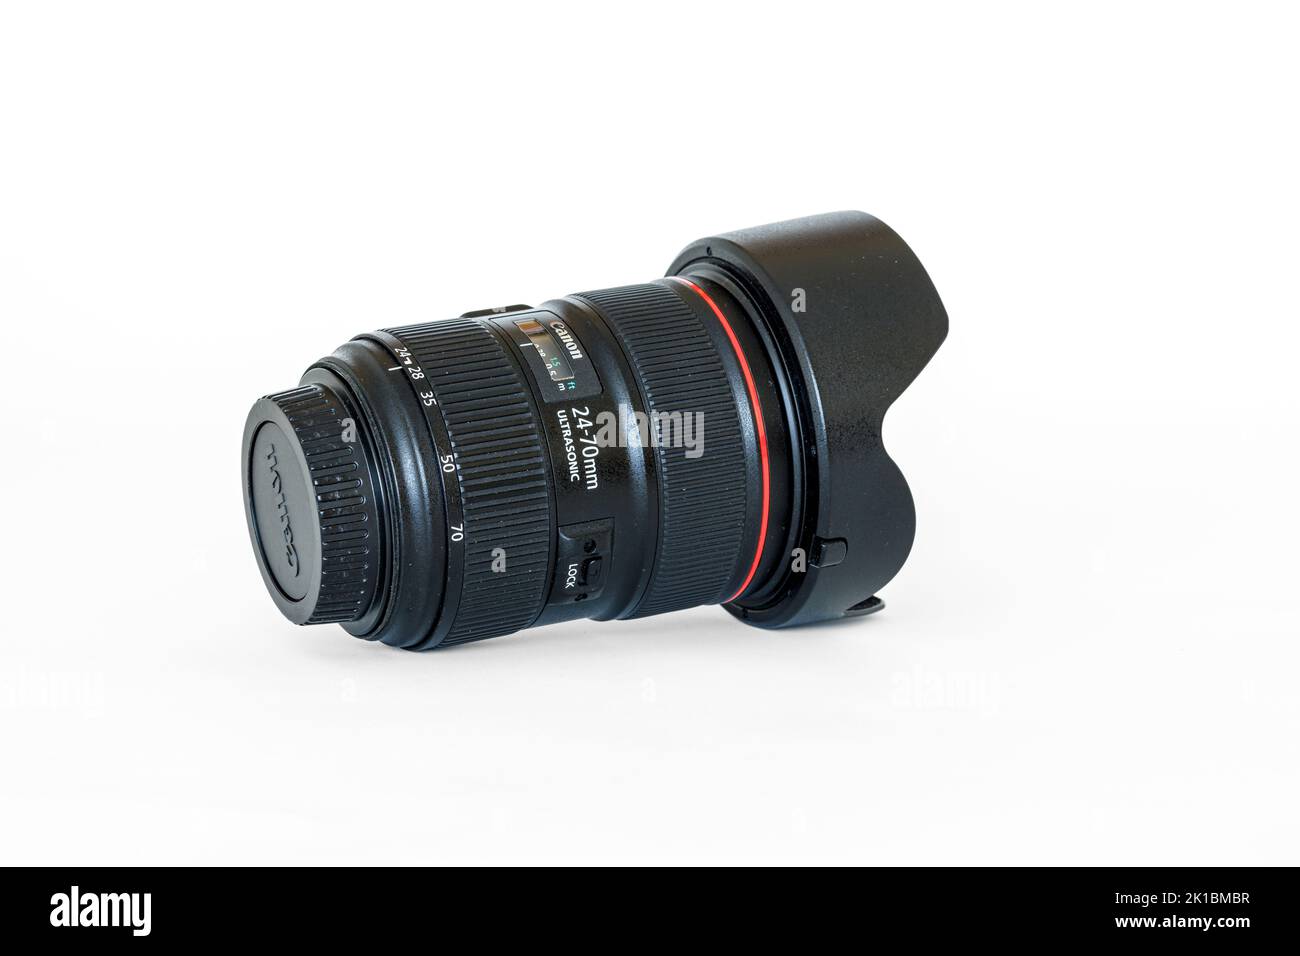 A camera lens for photography Stock Photo